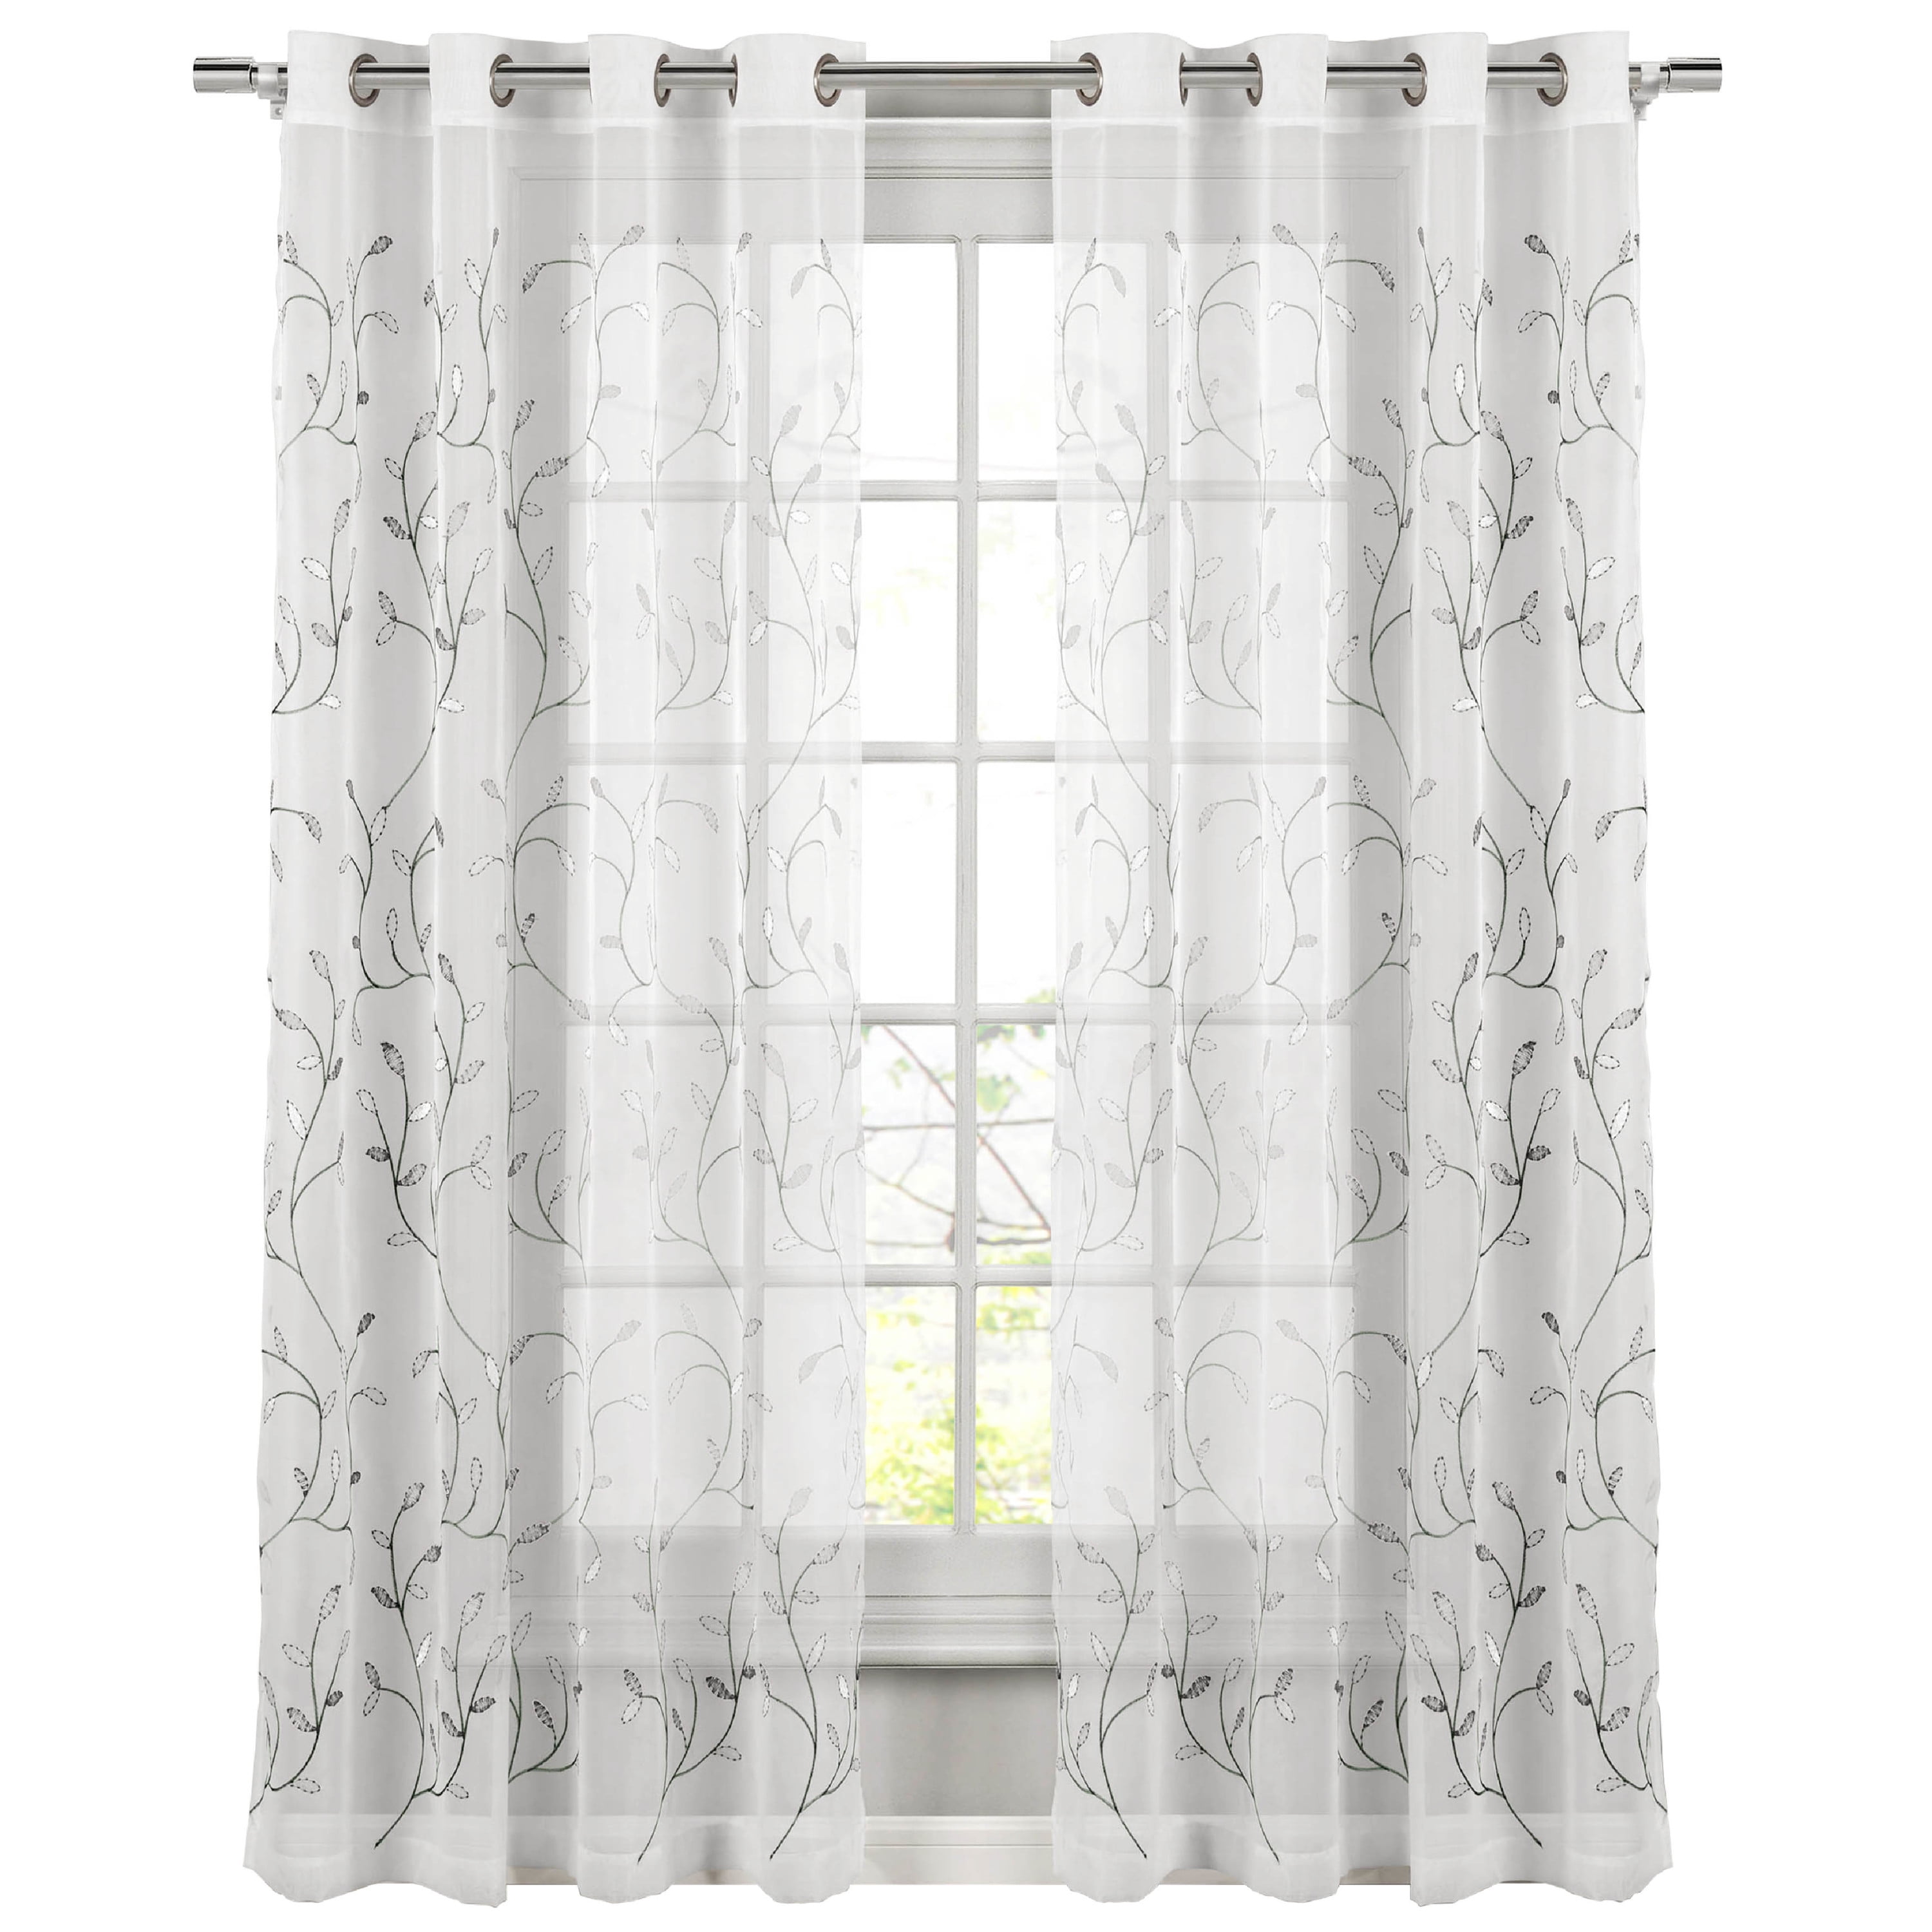 Grommet Curtain Panel, Embroidered Sheer Extra-Wide, Silver 54